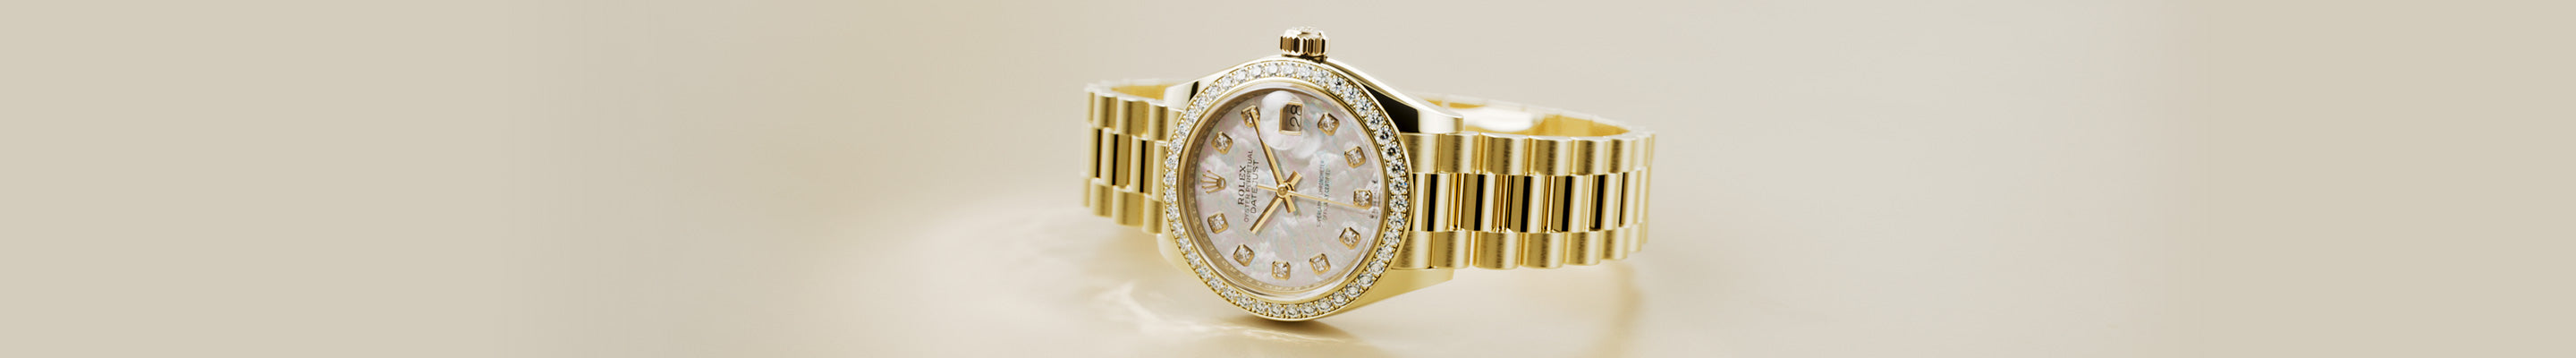 The Lady-Datejust